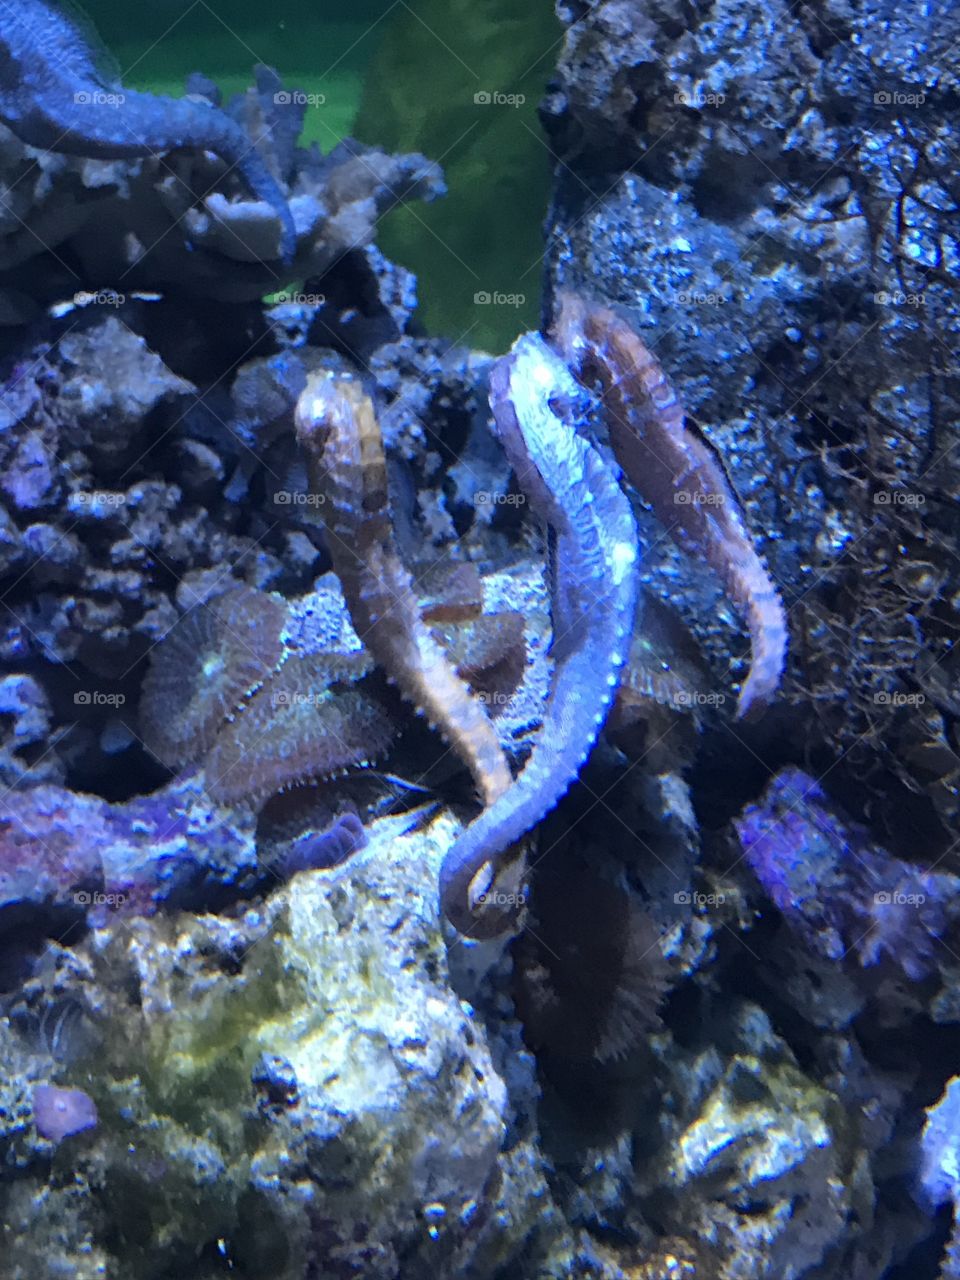 Lined Sea Horses with tails entwined.